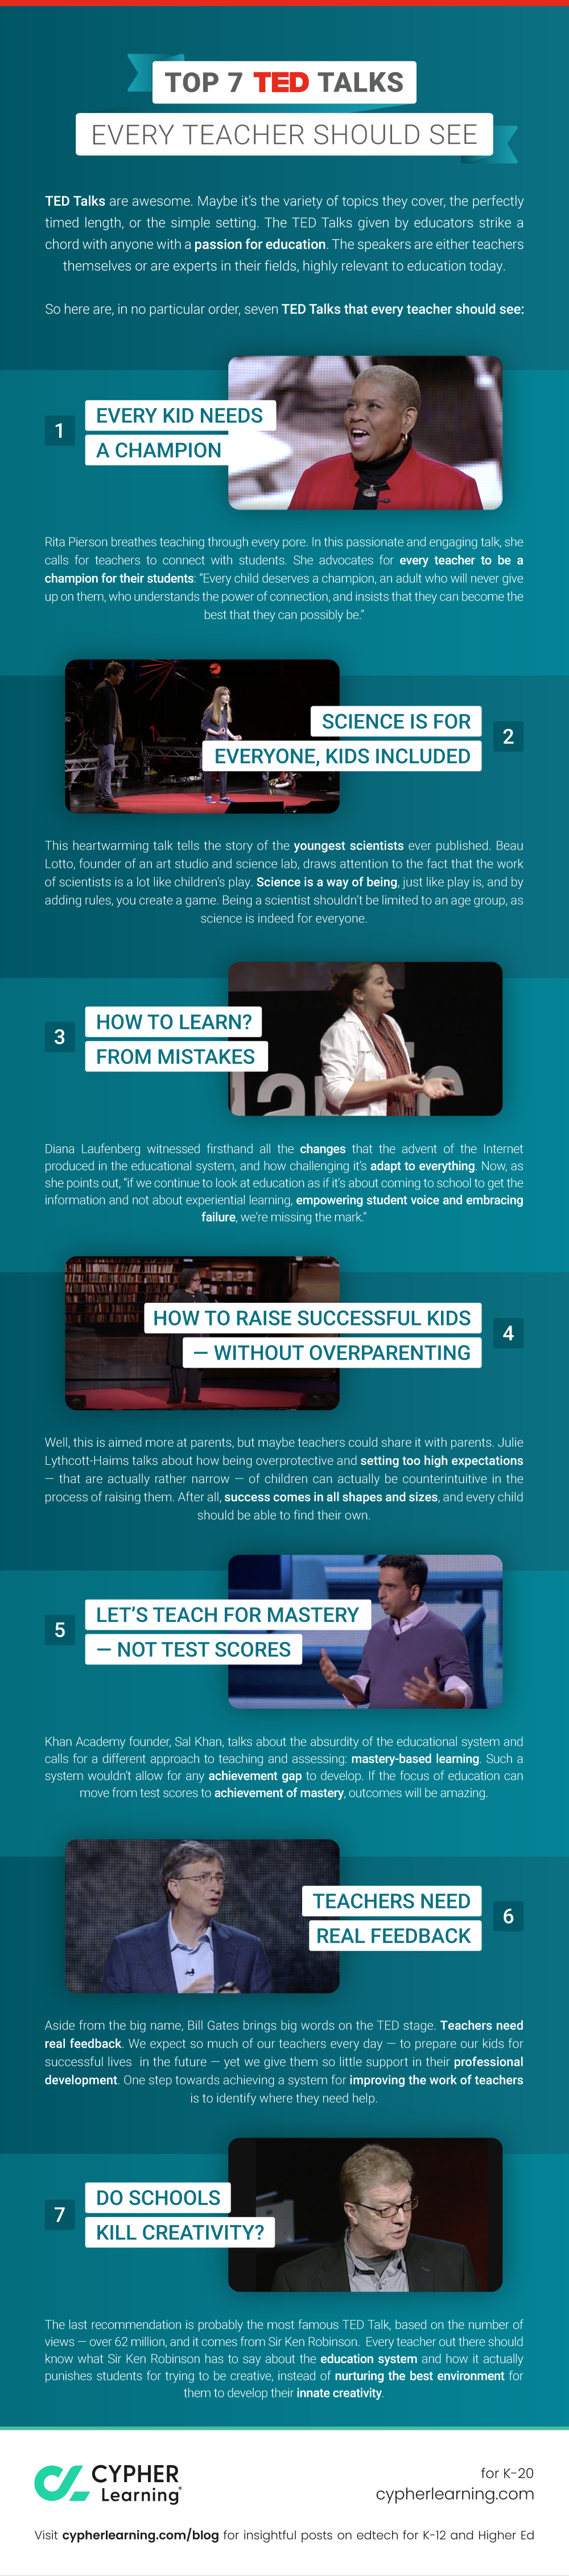 Top 7 TED Talks every teacher should see